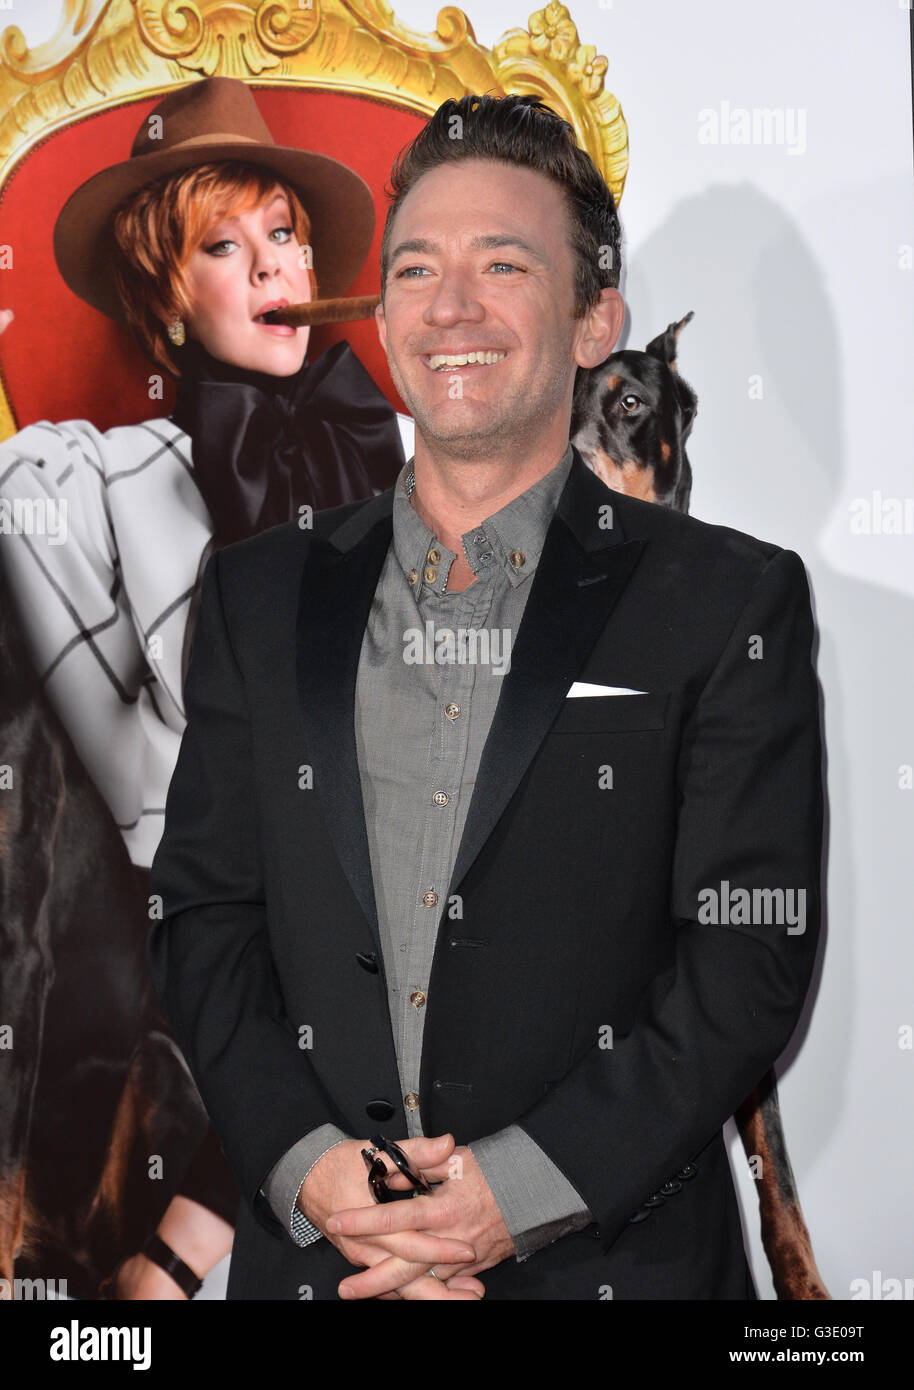 LOS ANGELES, CA - MARCH 28, 2016: David Faustino at the premiere for 'The Boss' at the Regency Village Theatre, Westwood. Stock Photo